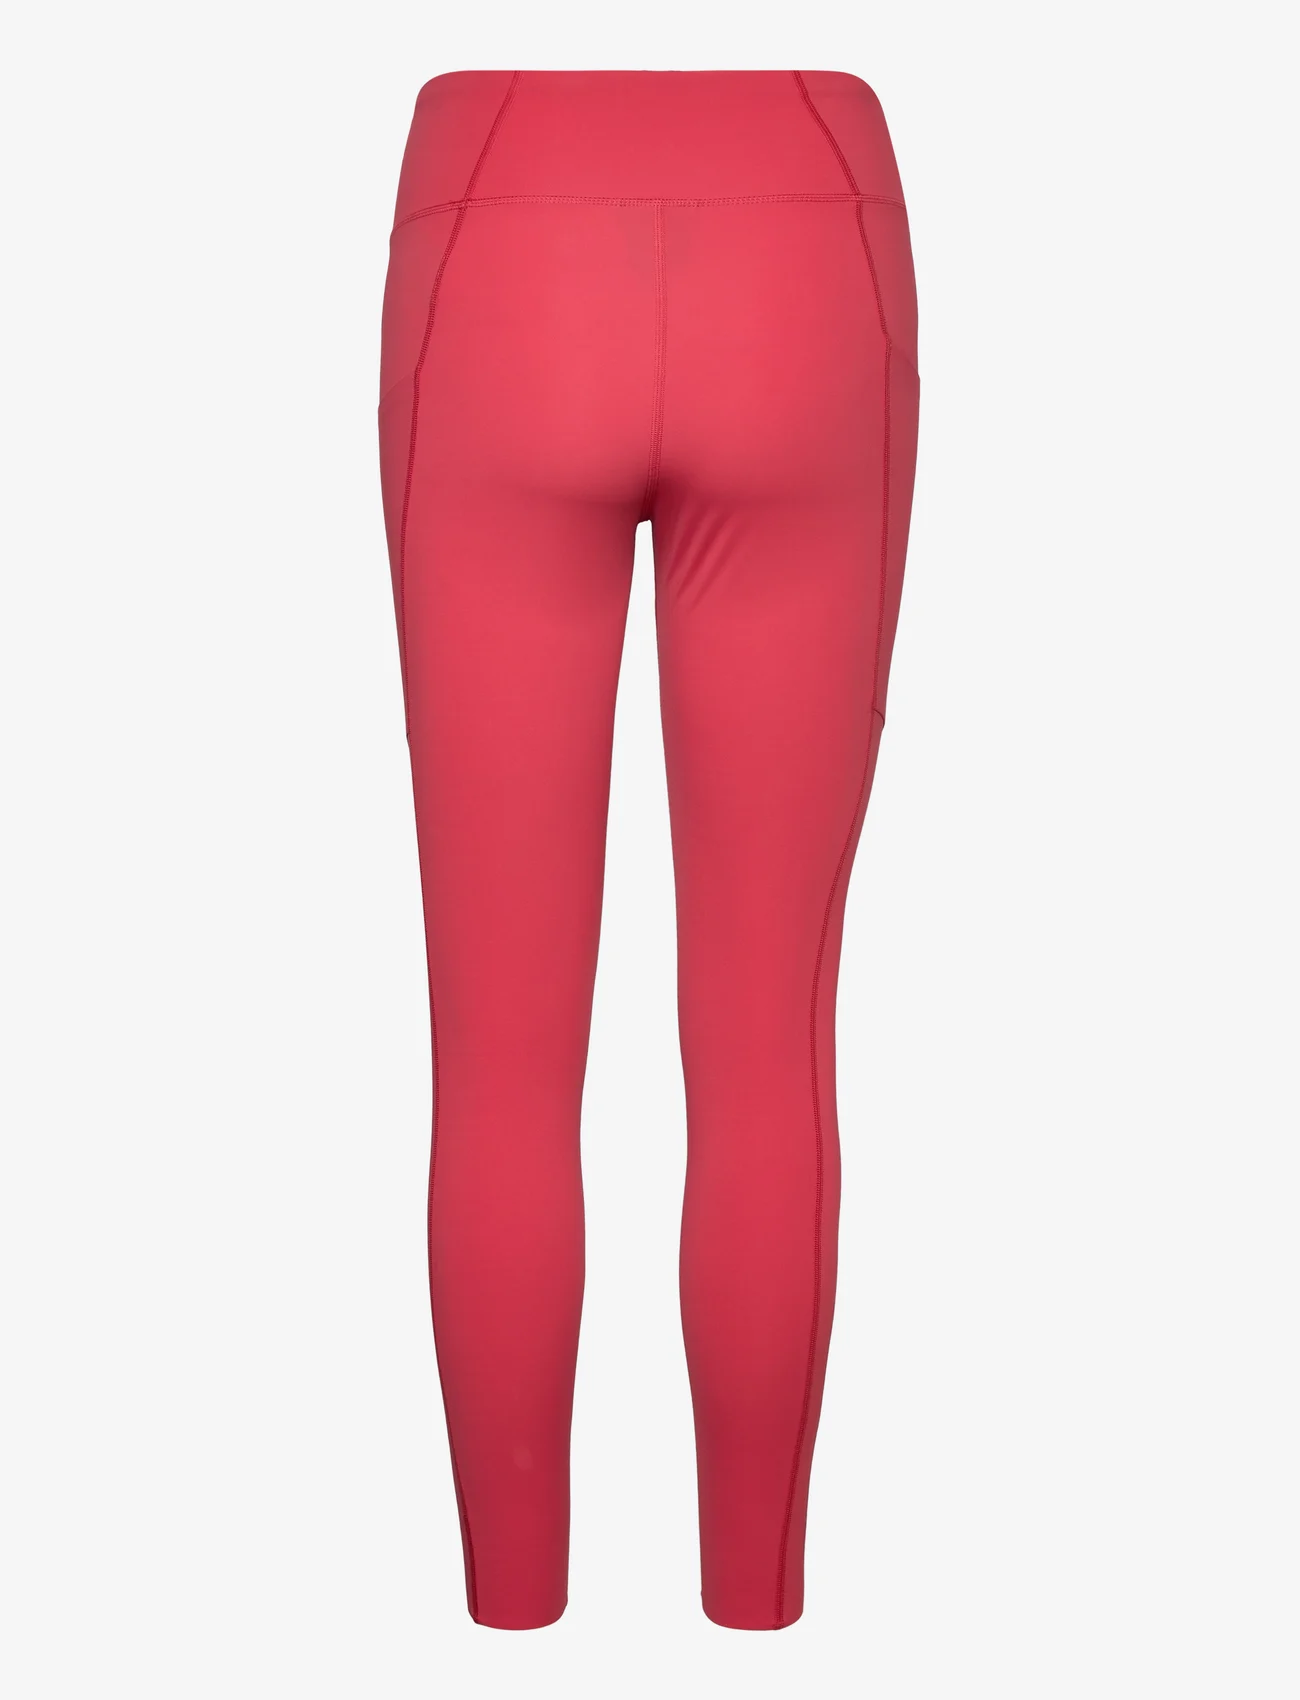 Peak Performance - W Power Tights-SOFTER RED - lauf-& trainingstights - softer red - 1